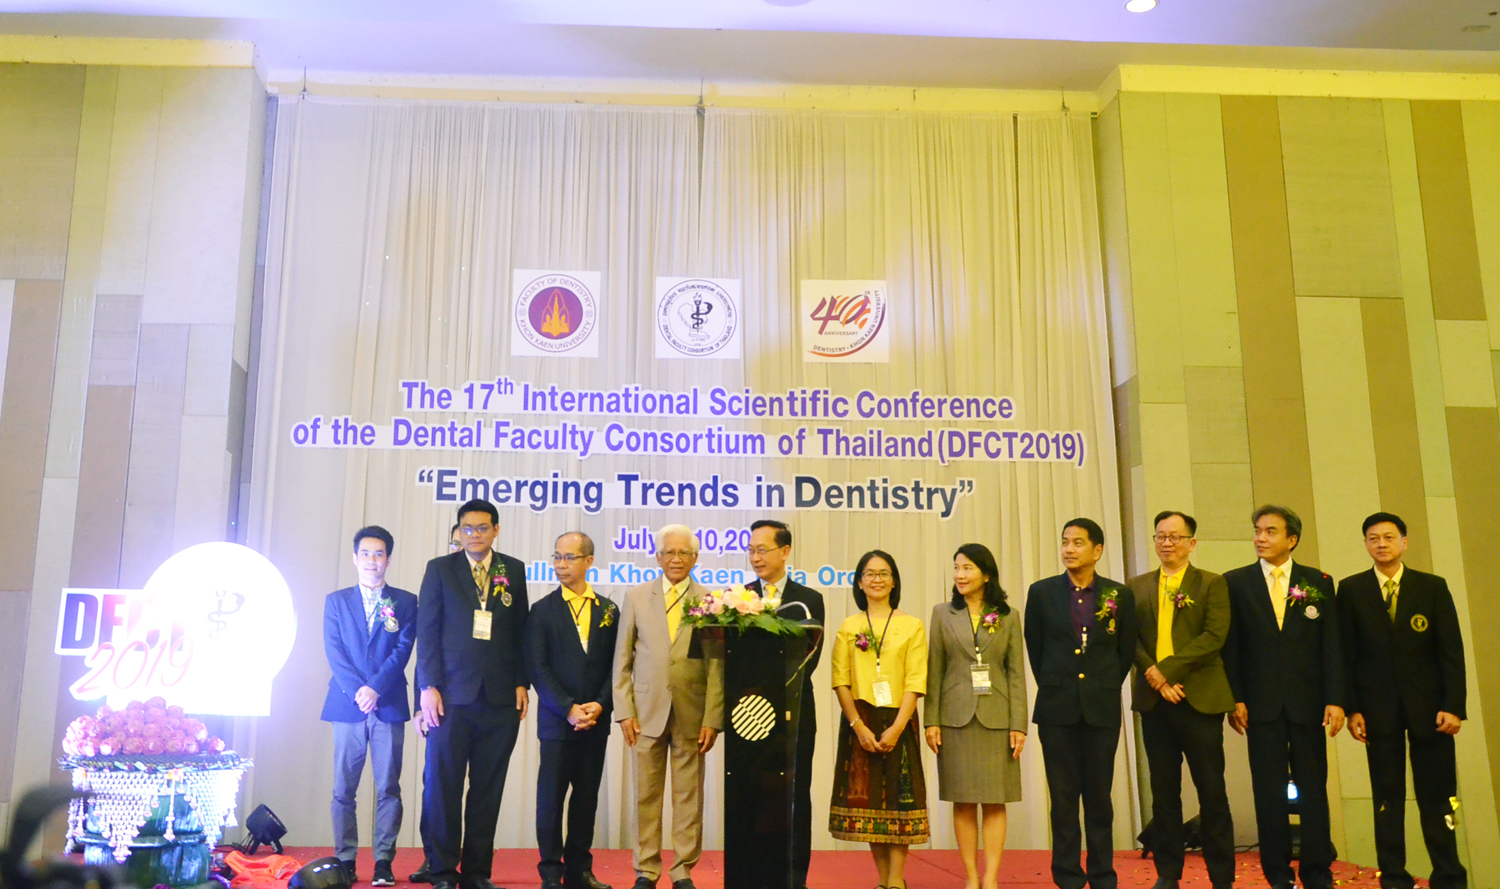 KKU holds an international dentistry conference with many world researchers attending